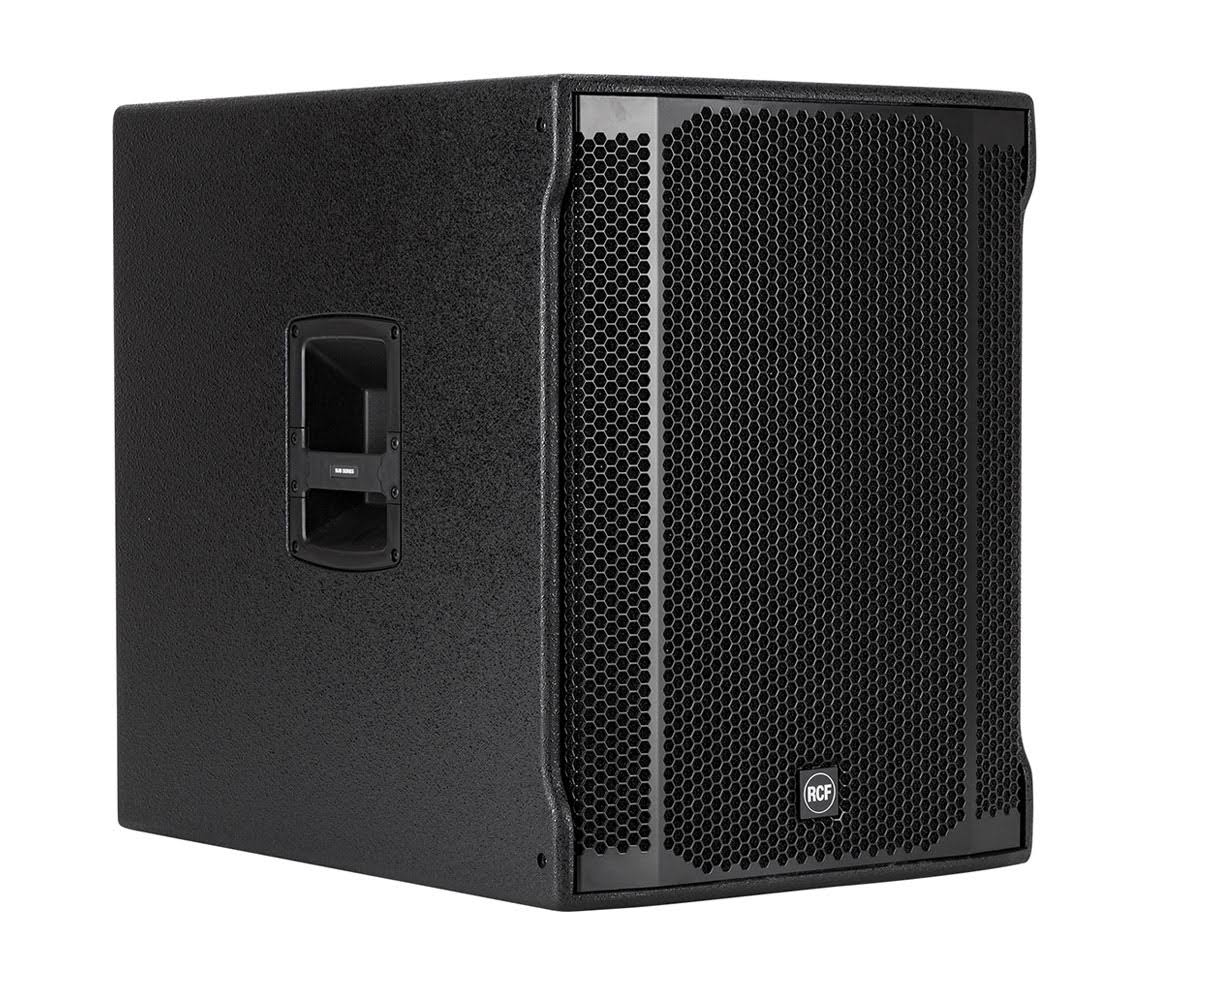 RCF SUB 8003-AS II - 18" 2200W Powered Subwoofer